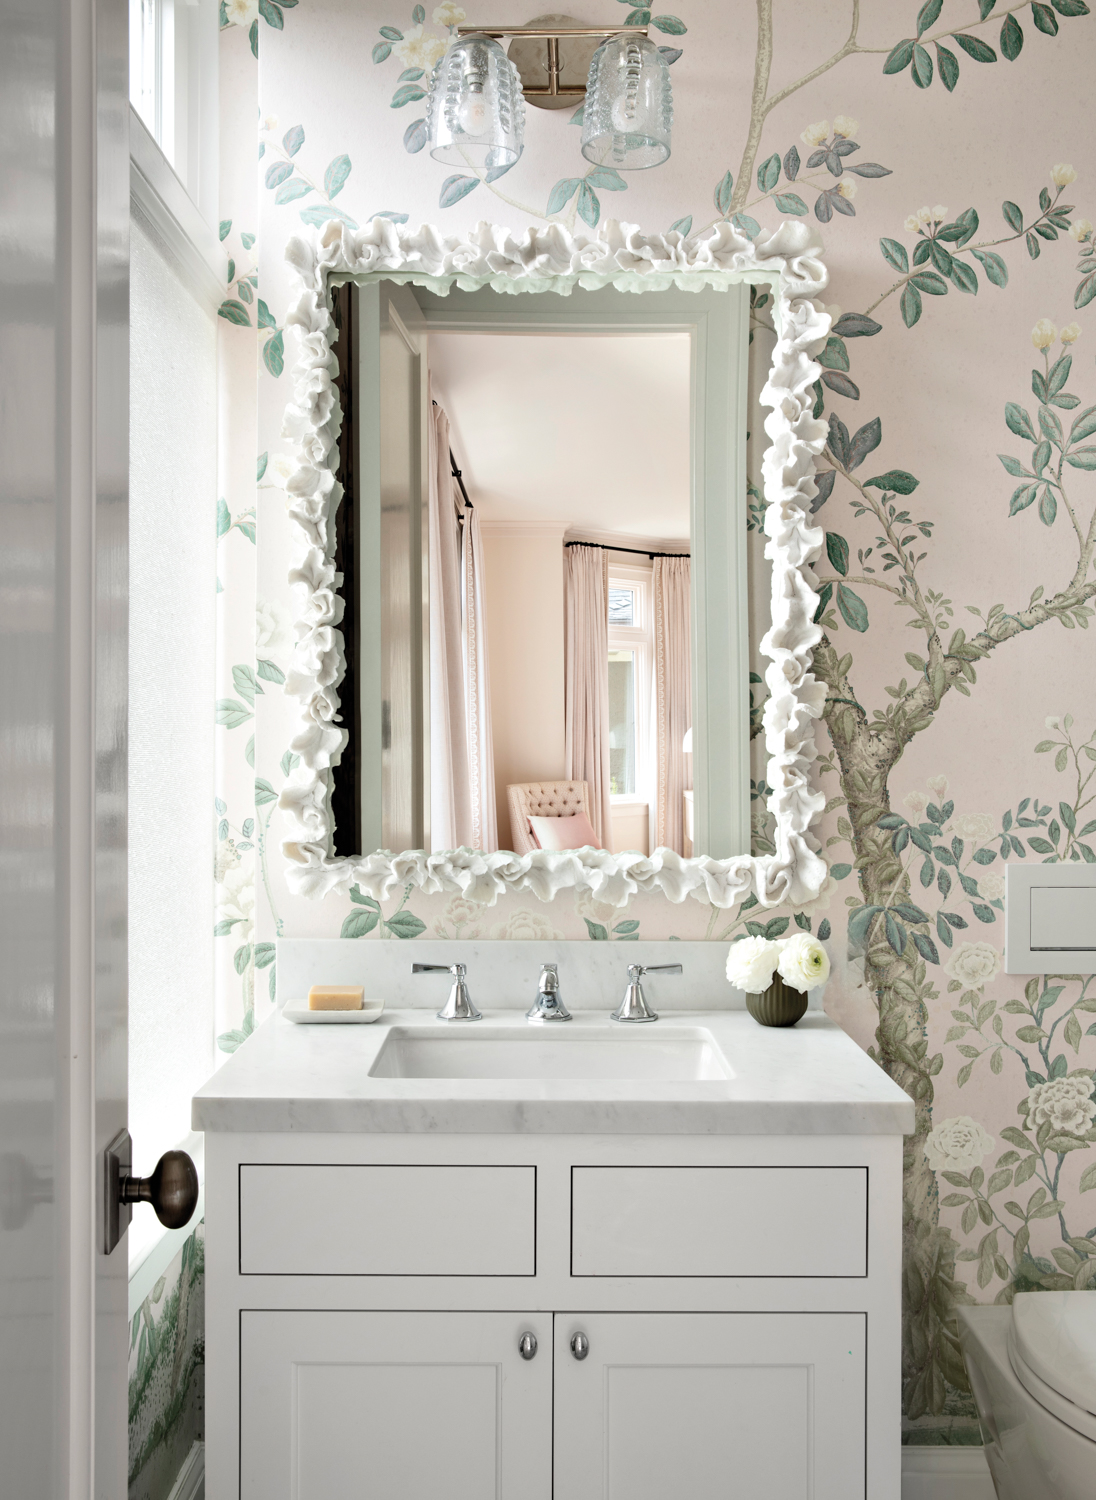 Powder room with floral wallpaper...